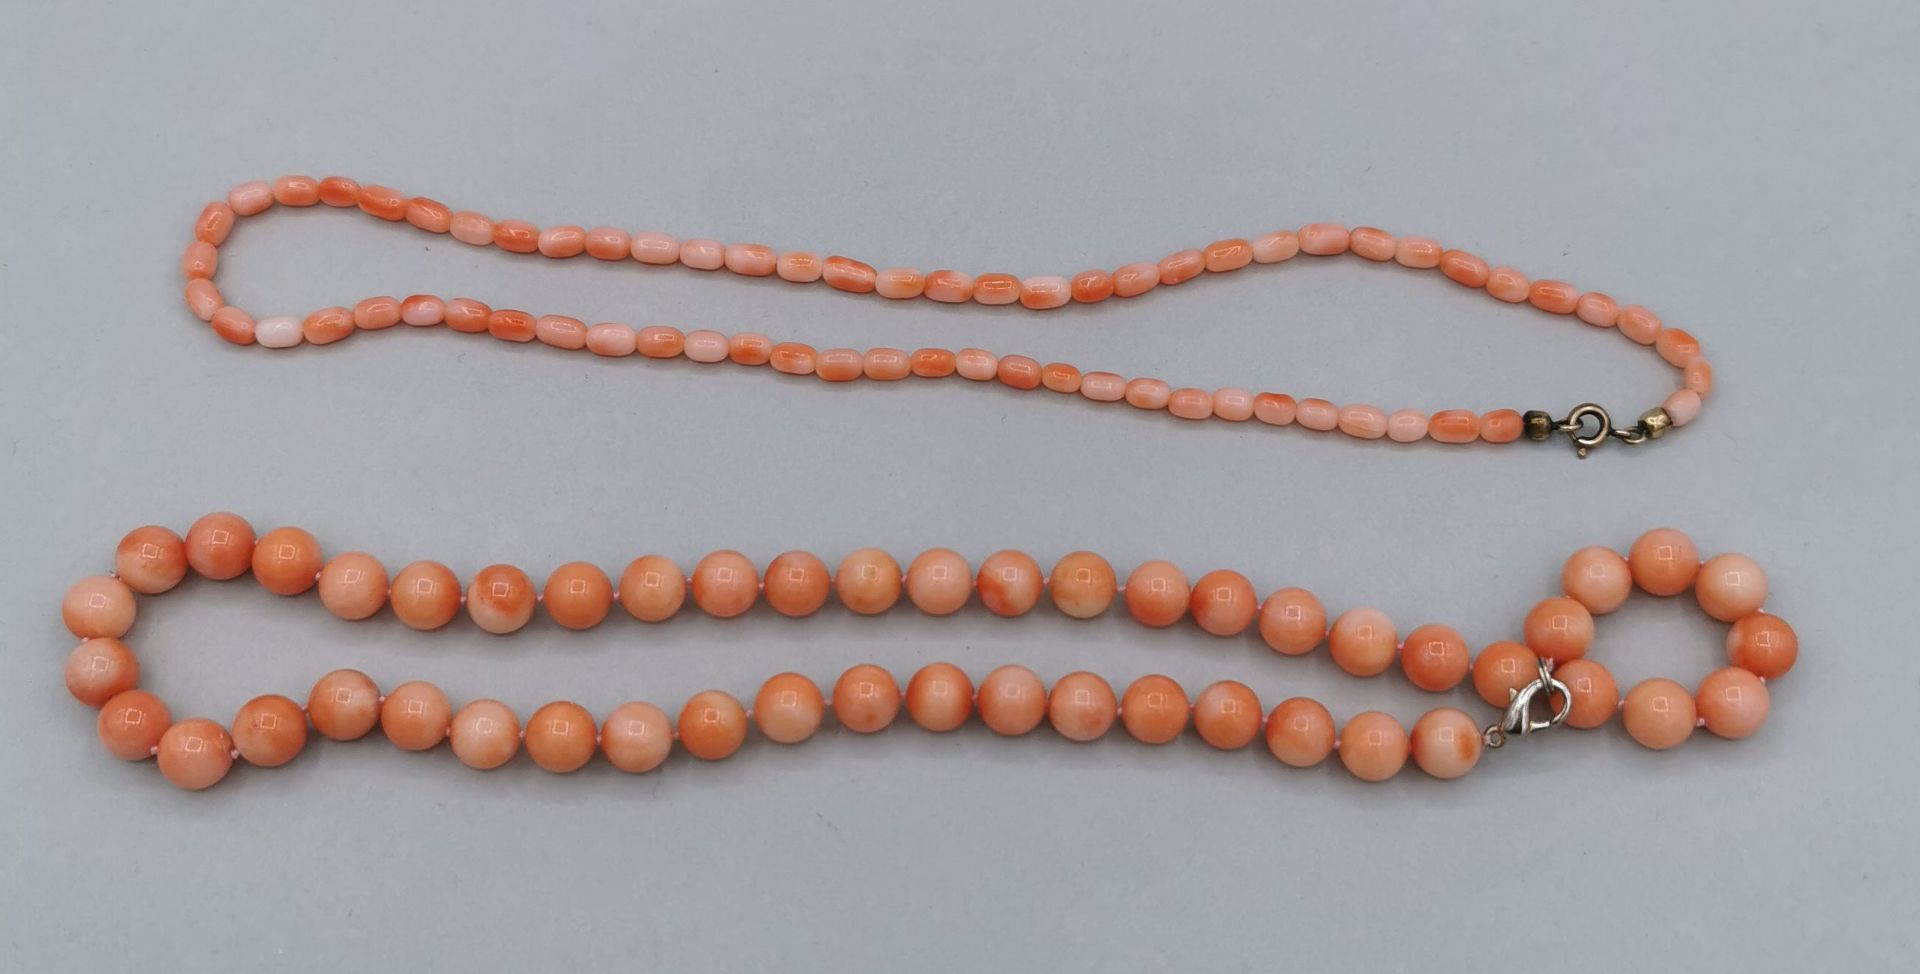 2 ENGEL SKIN CORAL - CHAINS - Image 2 of 4